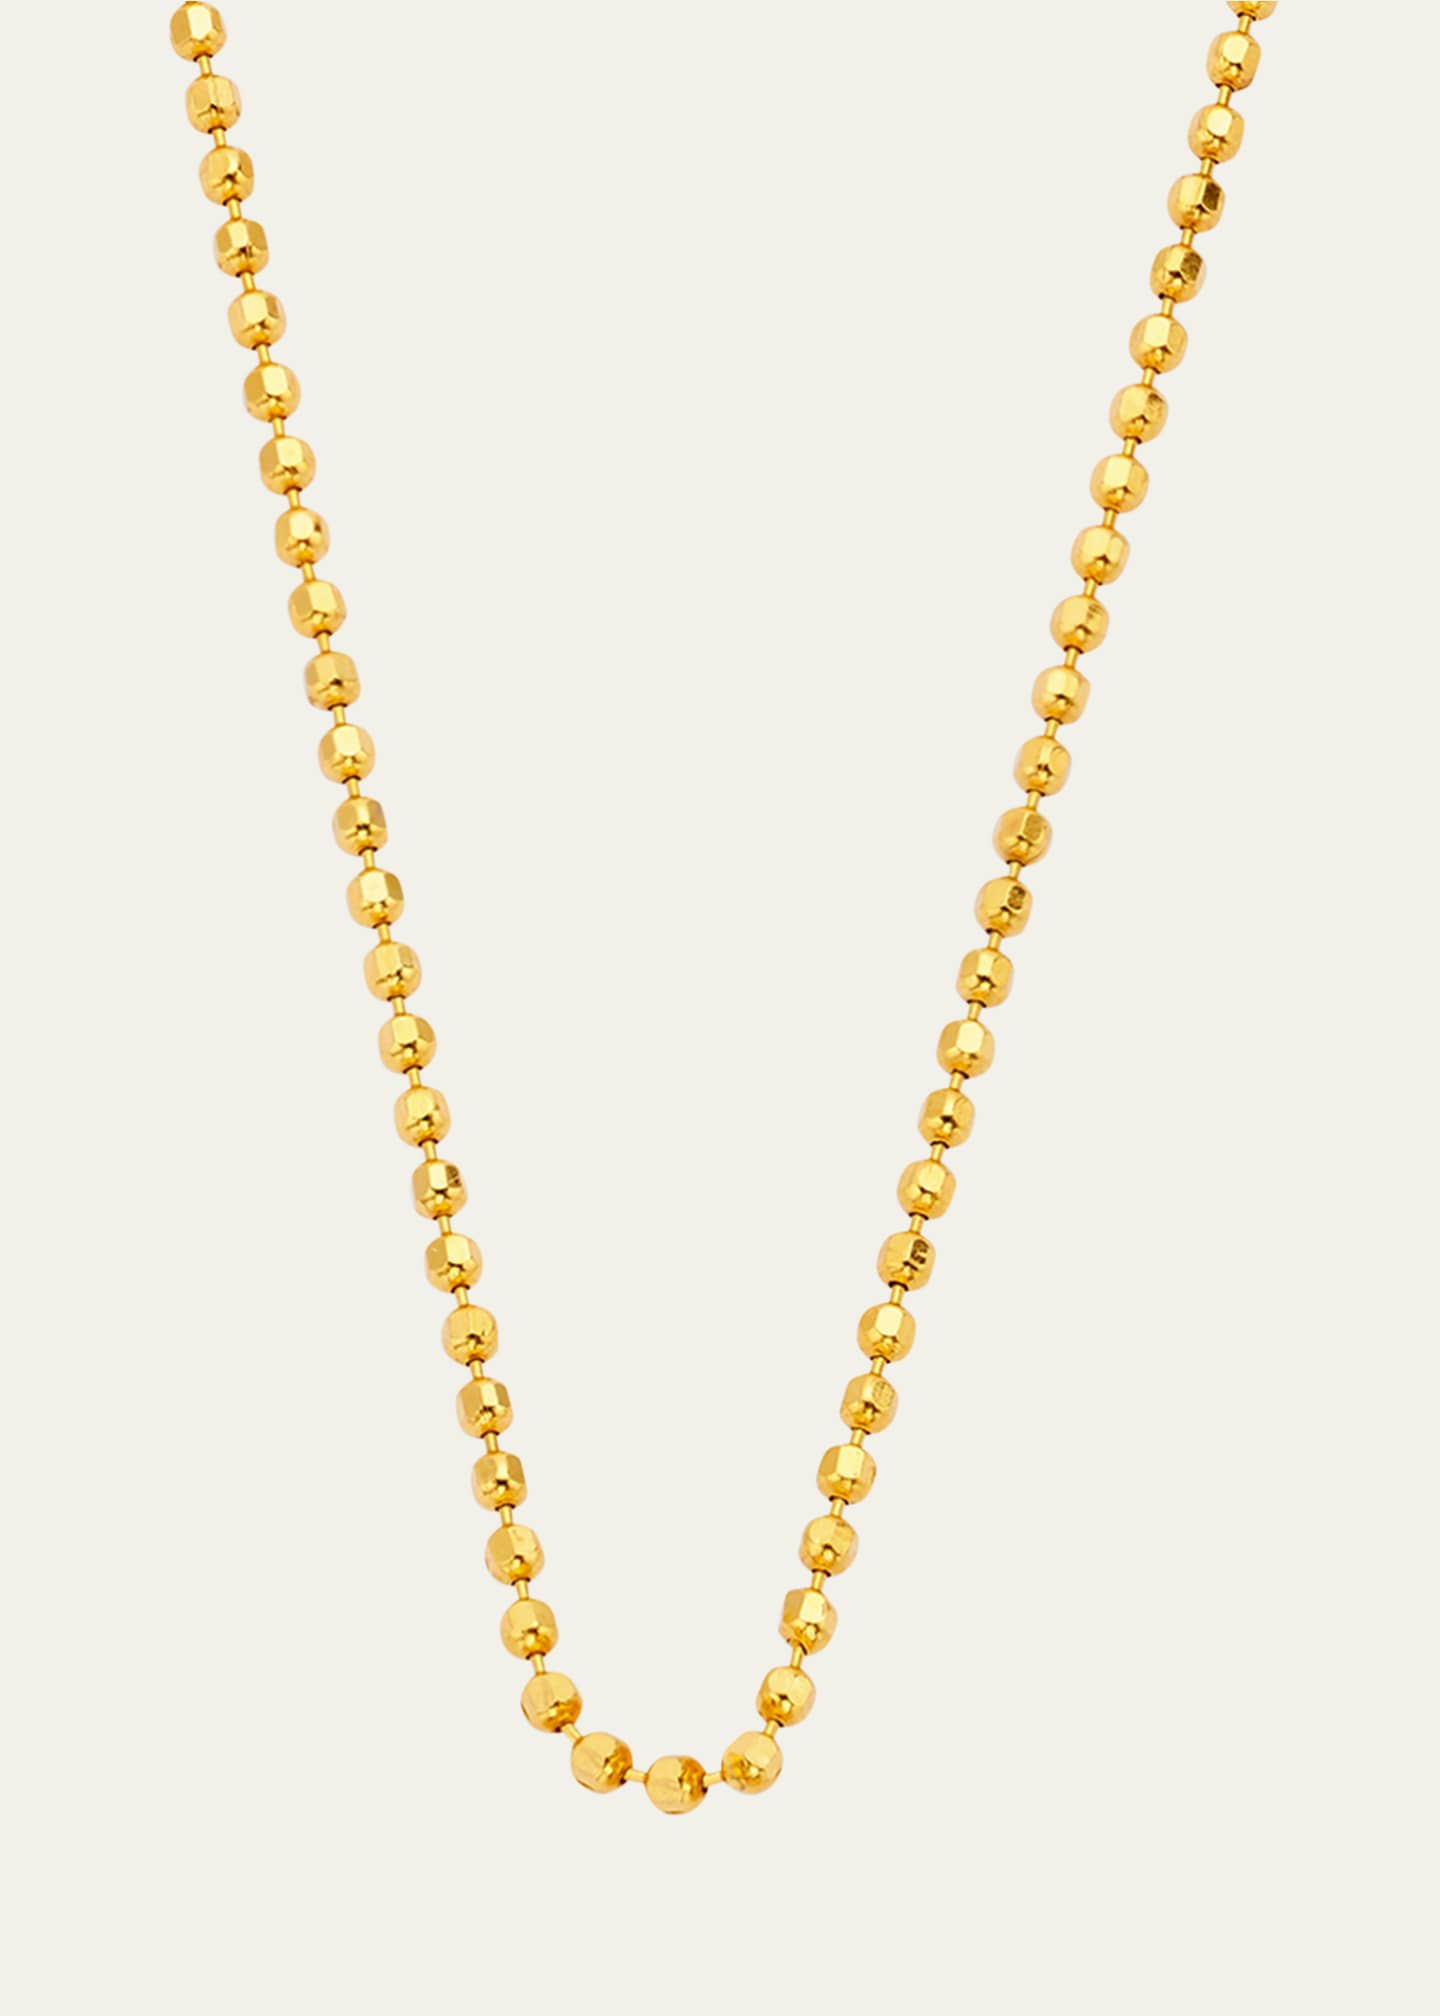 Buddha Mama 22K Disco Ball Chain with Lobster Clasp, 3mm, 20